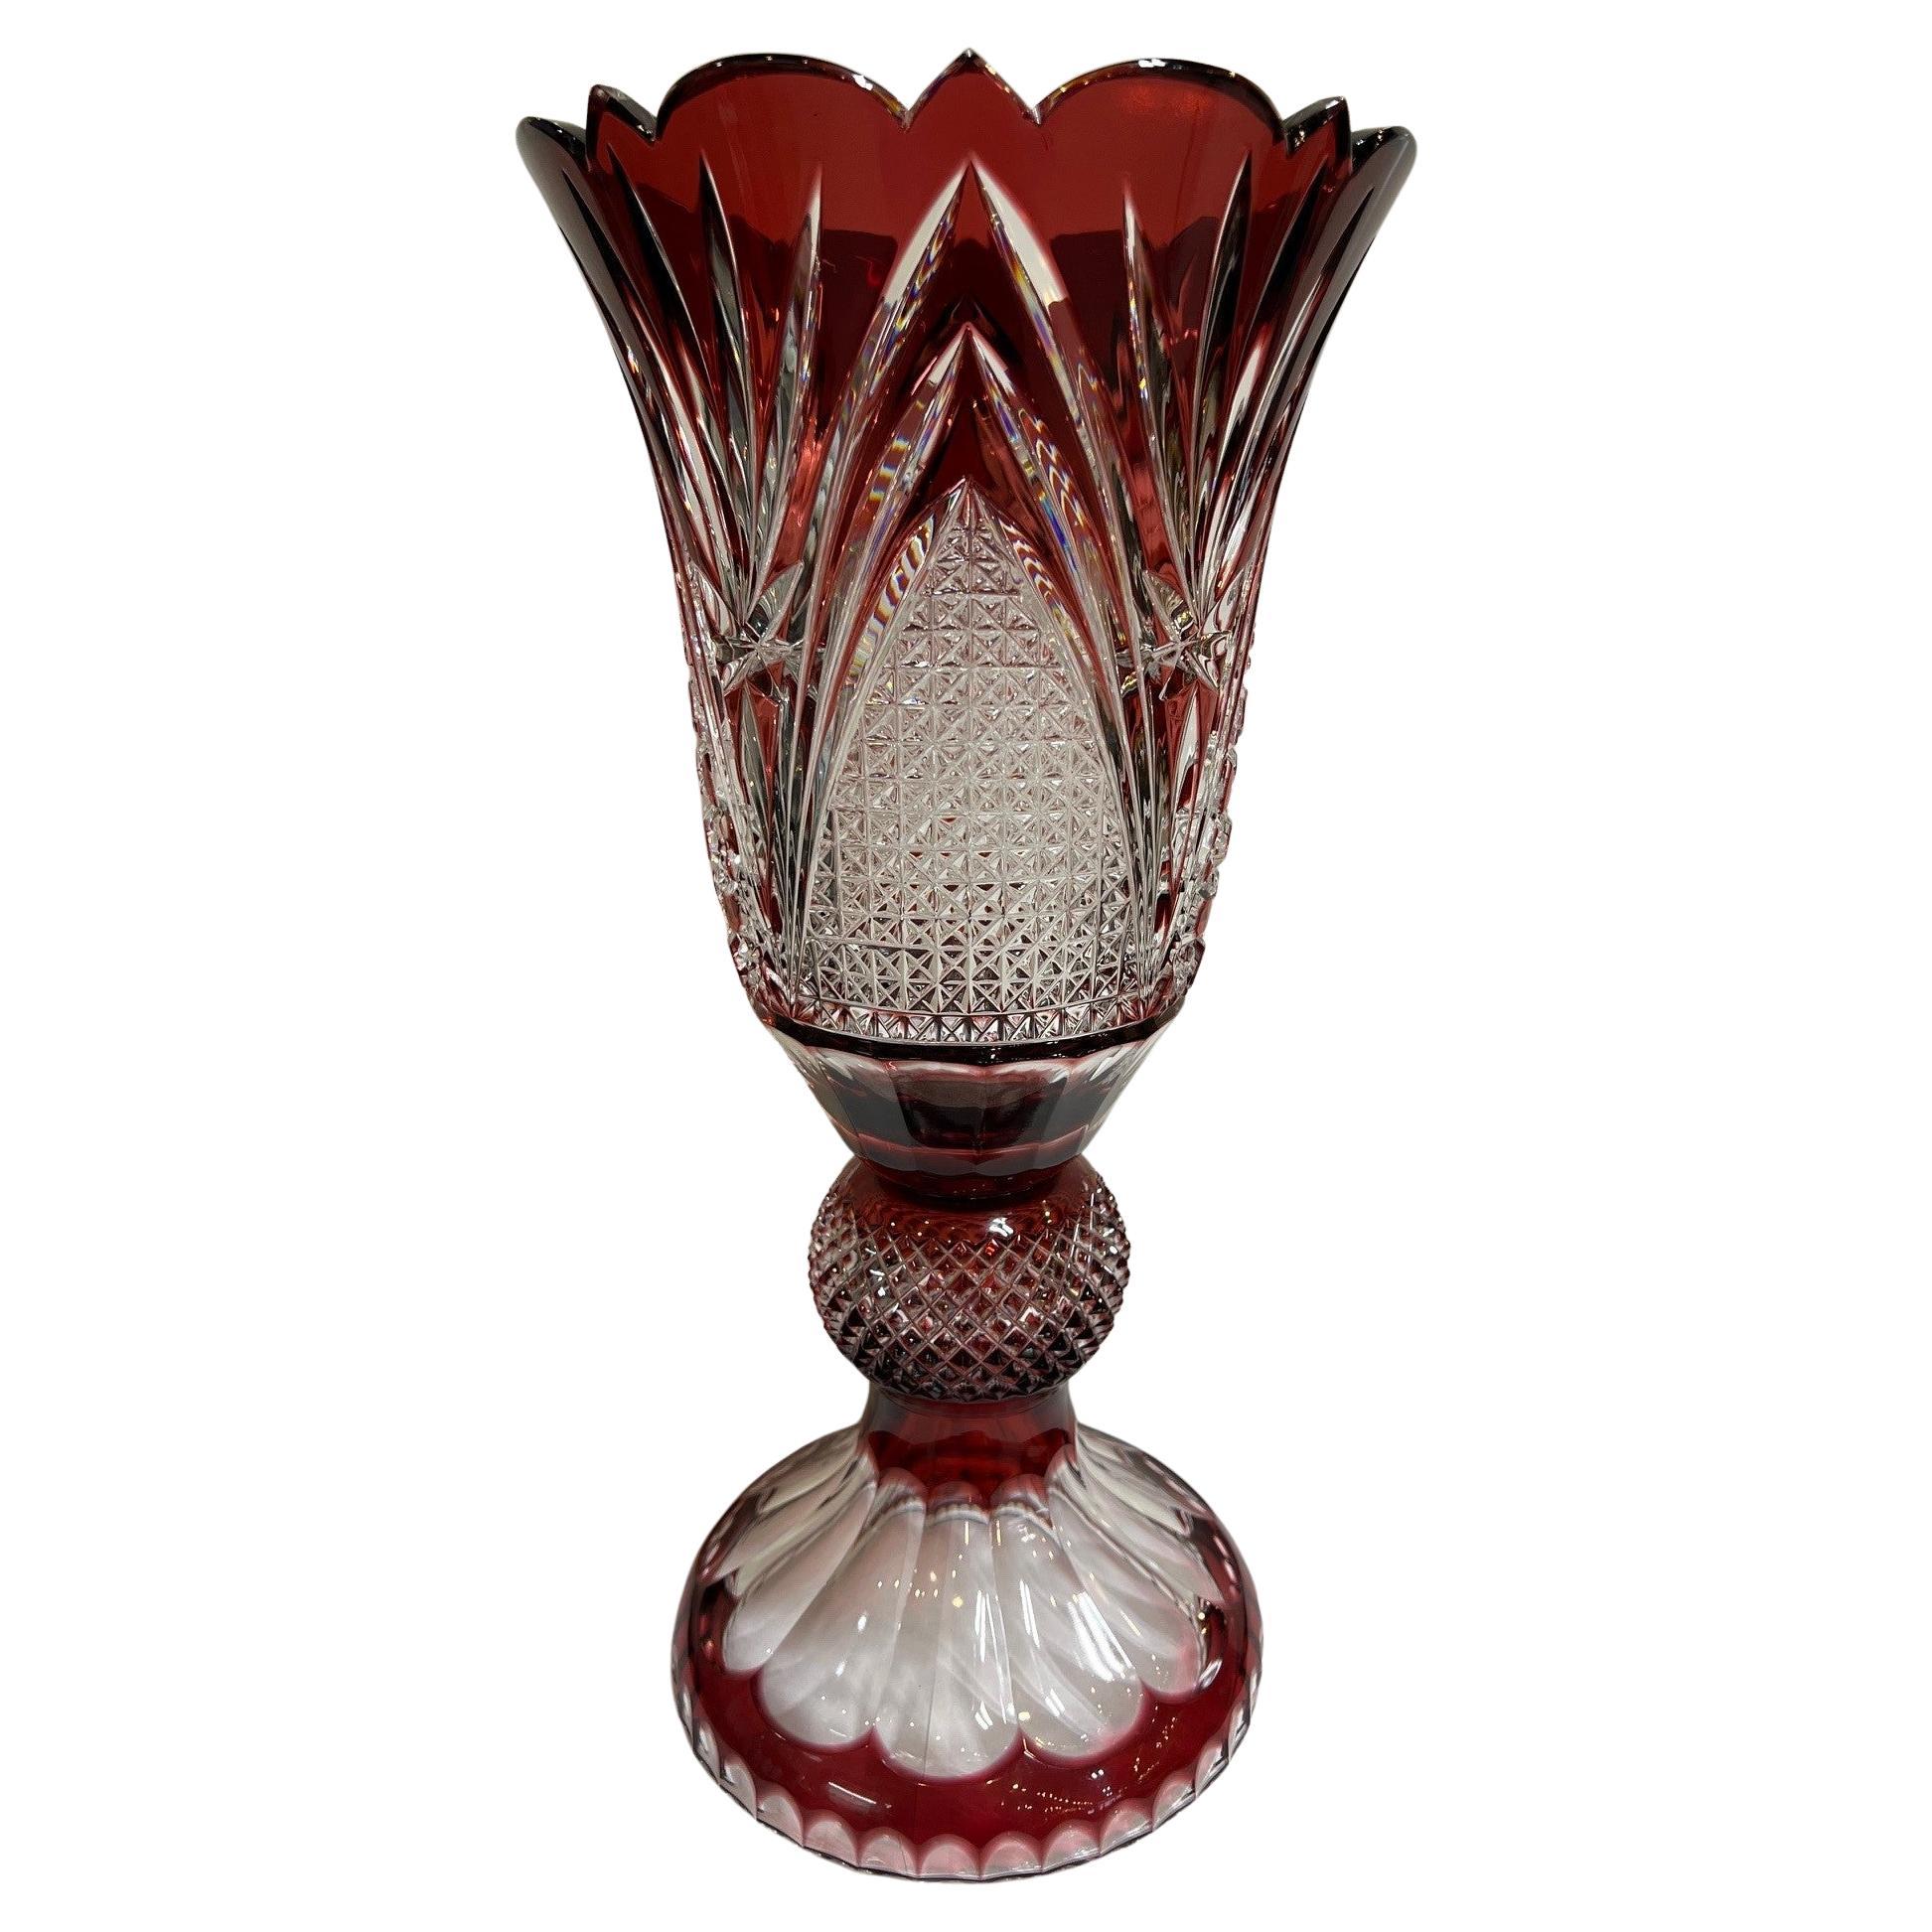 Hand Cut Lead Crystal Tall Pedestal Vase, Compote by Caesar Crystal Bohemiae Co.